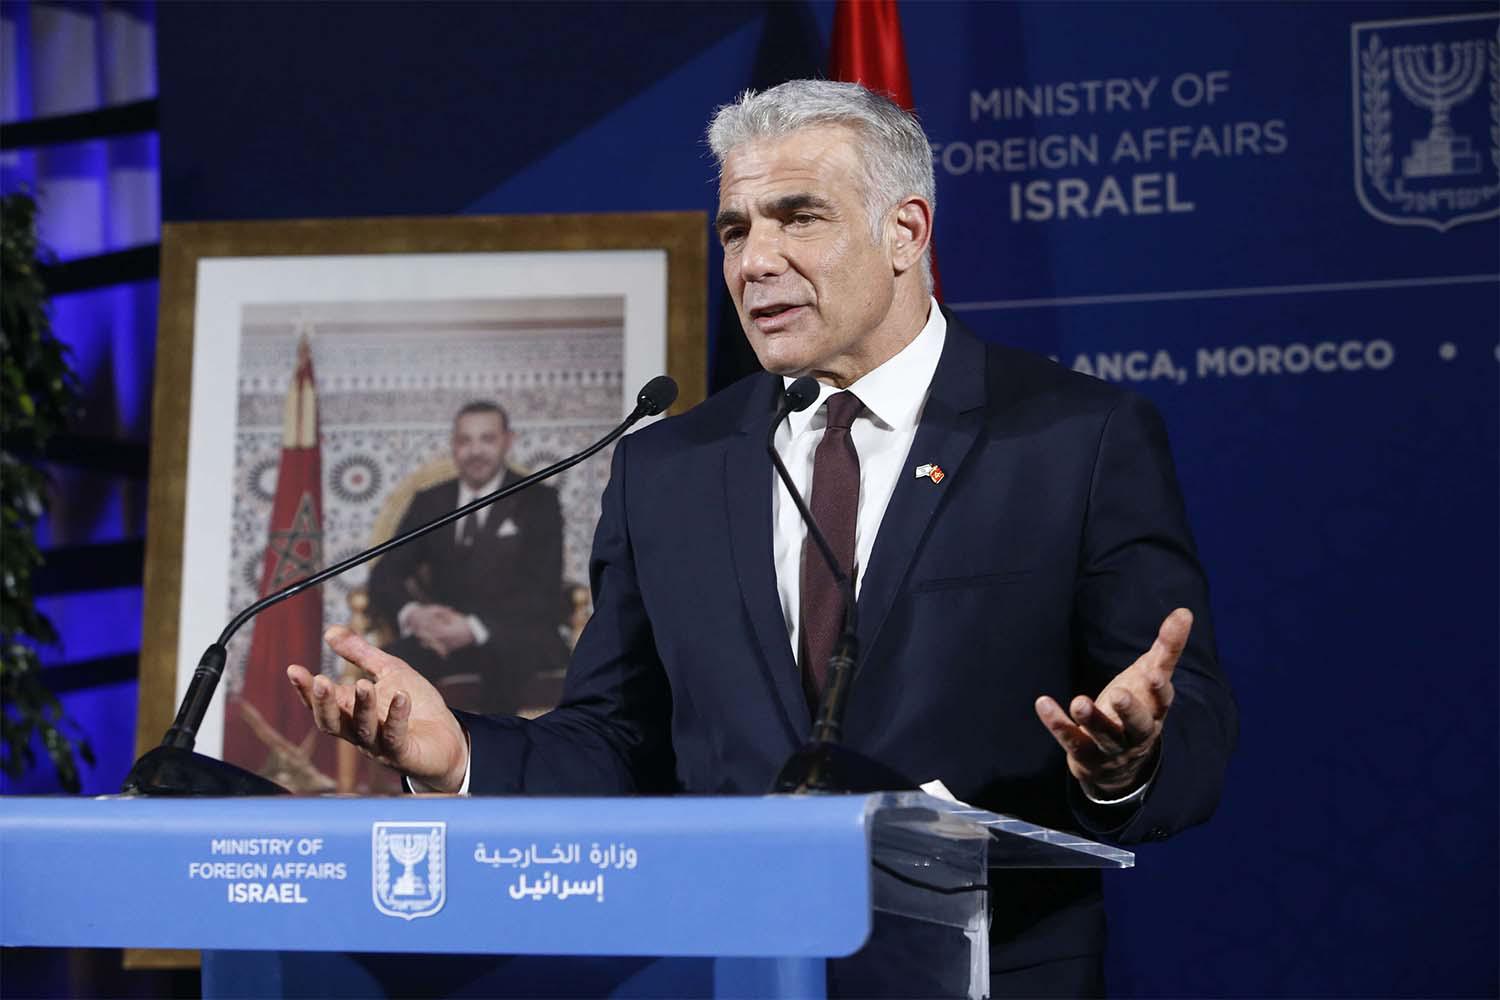 Lapid said his concerns were based on fears Algeria was getting close to Iran